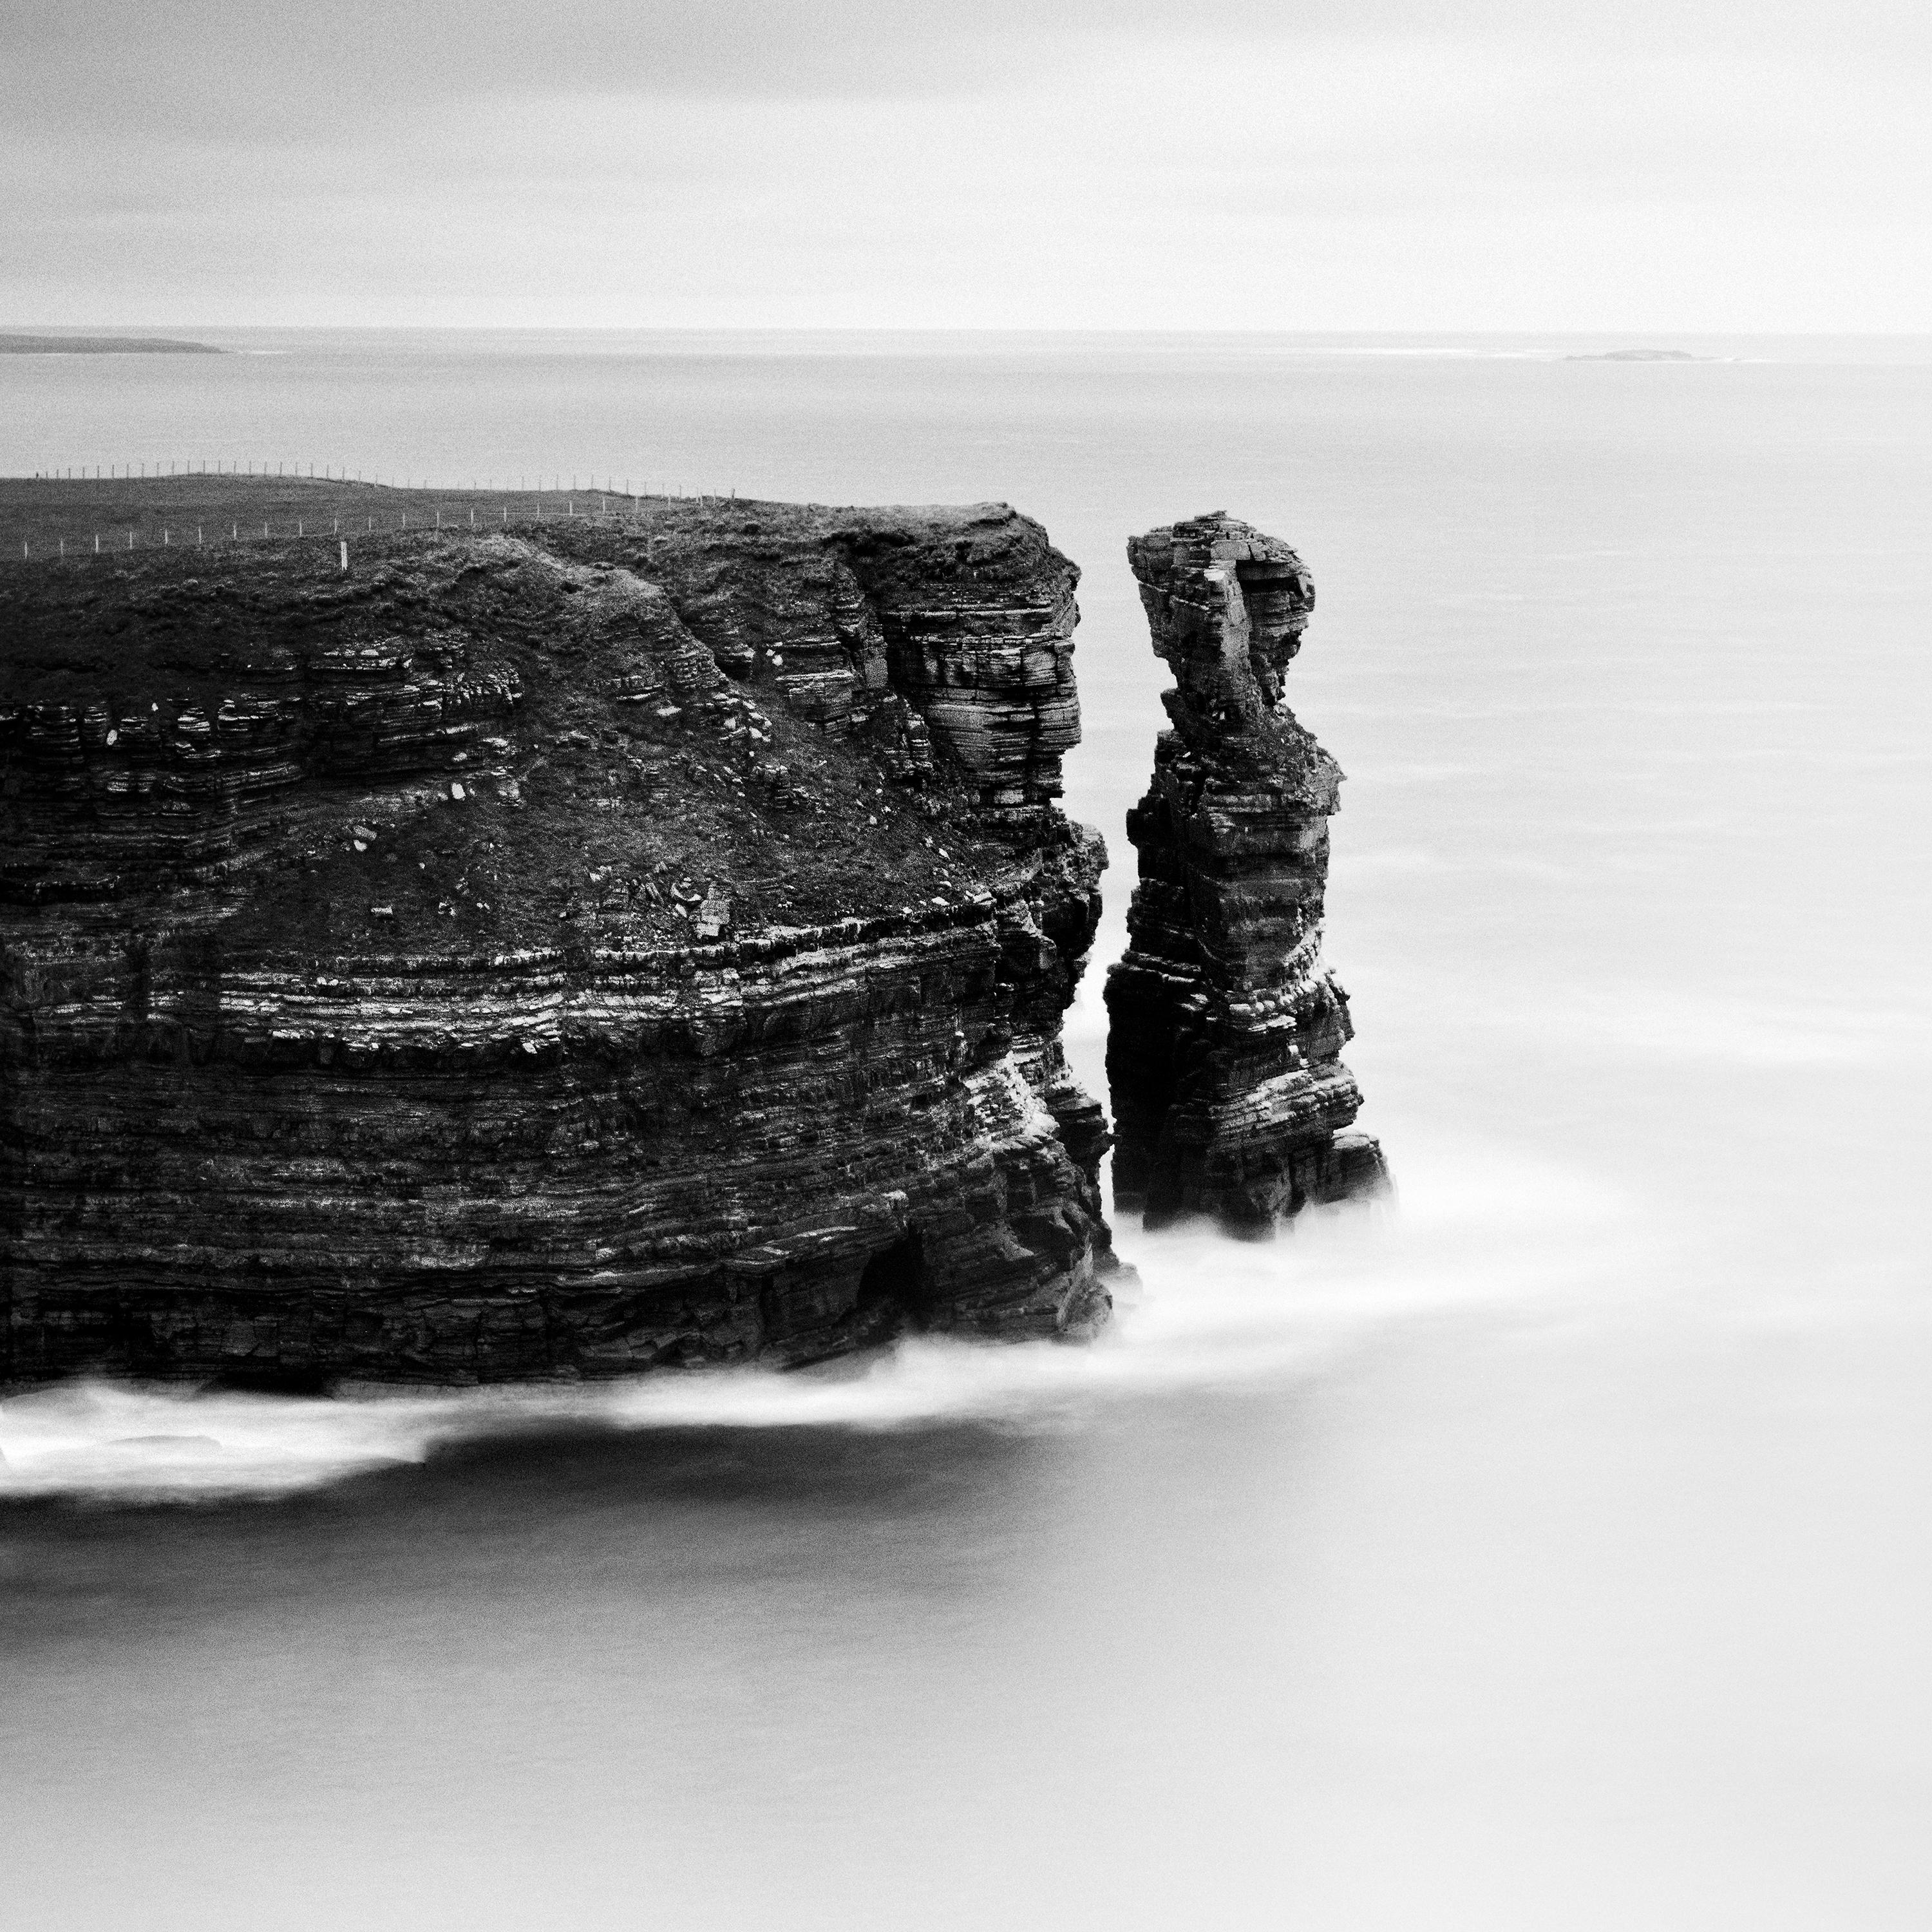 Black and White Fine Art waterscape Photography for Sale. Split rock on the impressive Scottish coast, Scotland. Archival pigment ink print, edition of 9. Signed, titled, dated and numbered by artist. Certificate of authenticity included. Printed